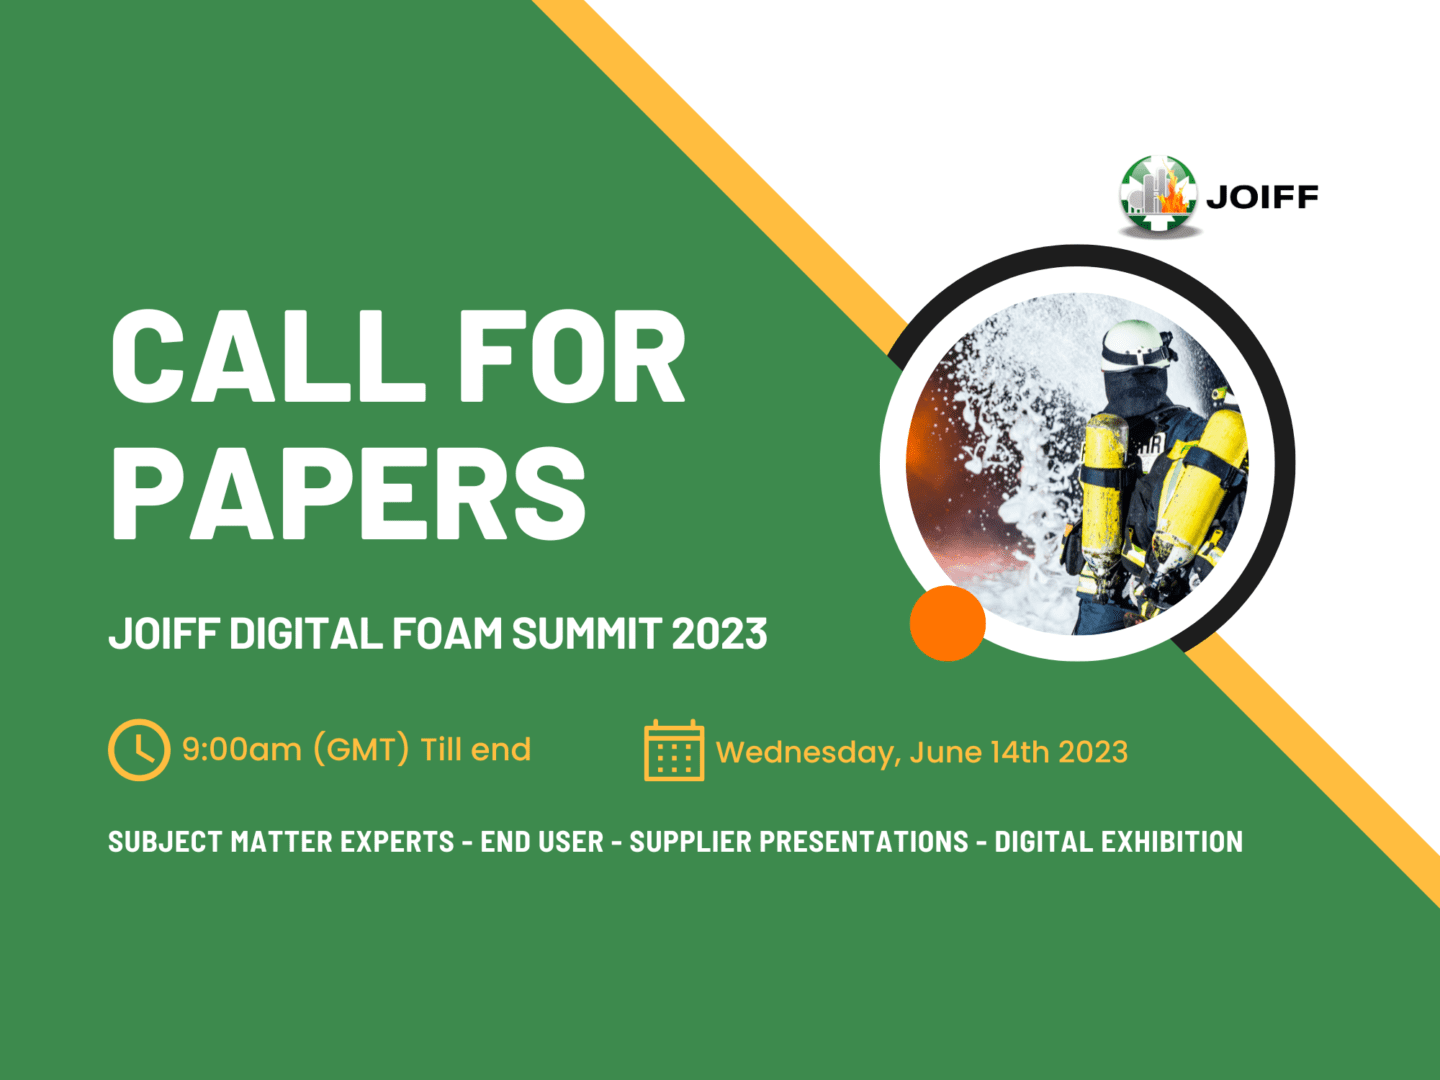 JOIFF Digital Foam Summit | CALL FOR PAPERS!